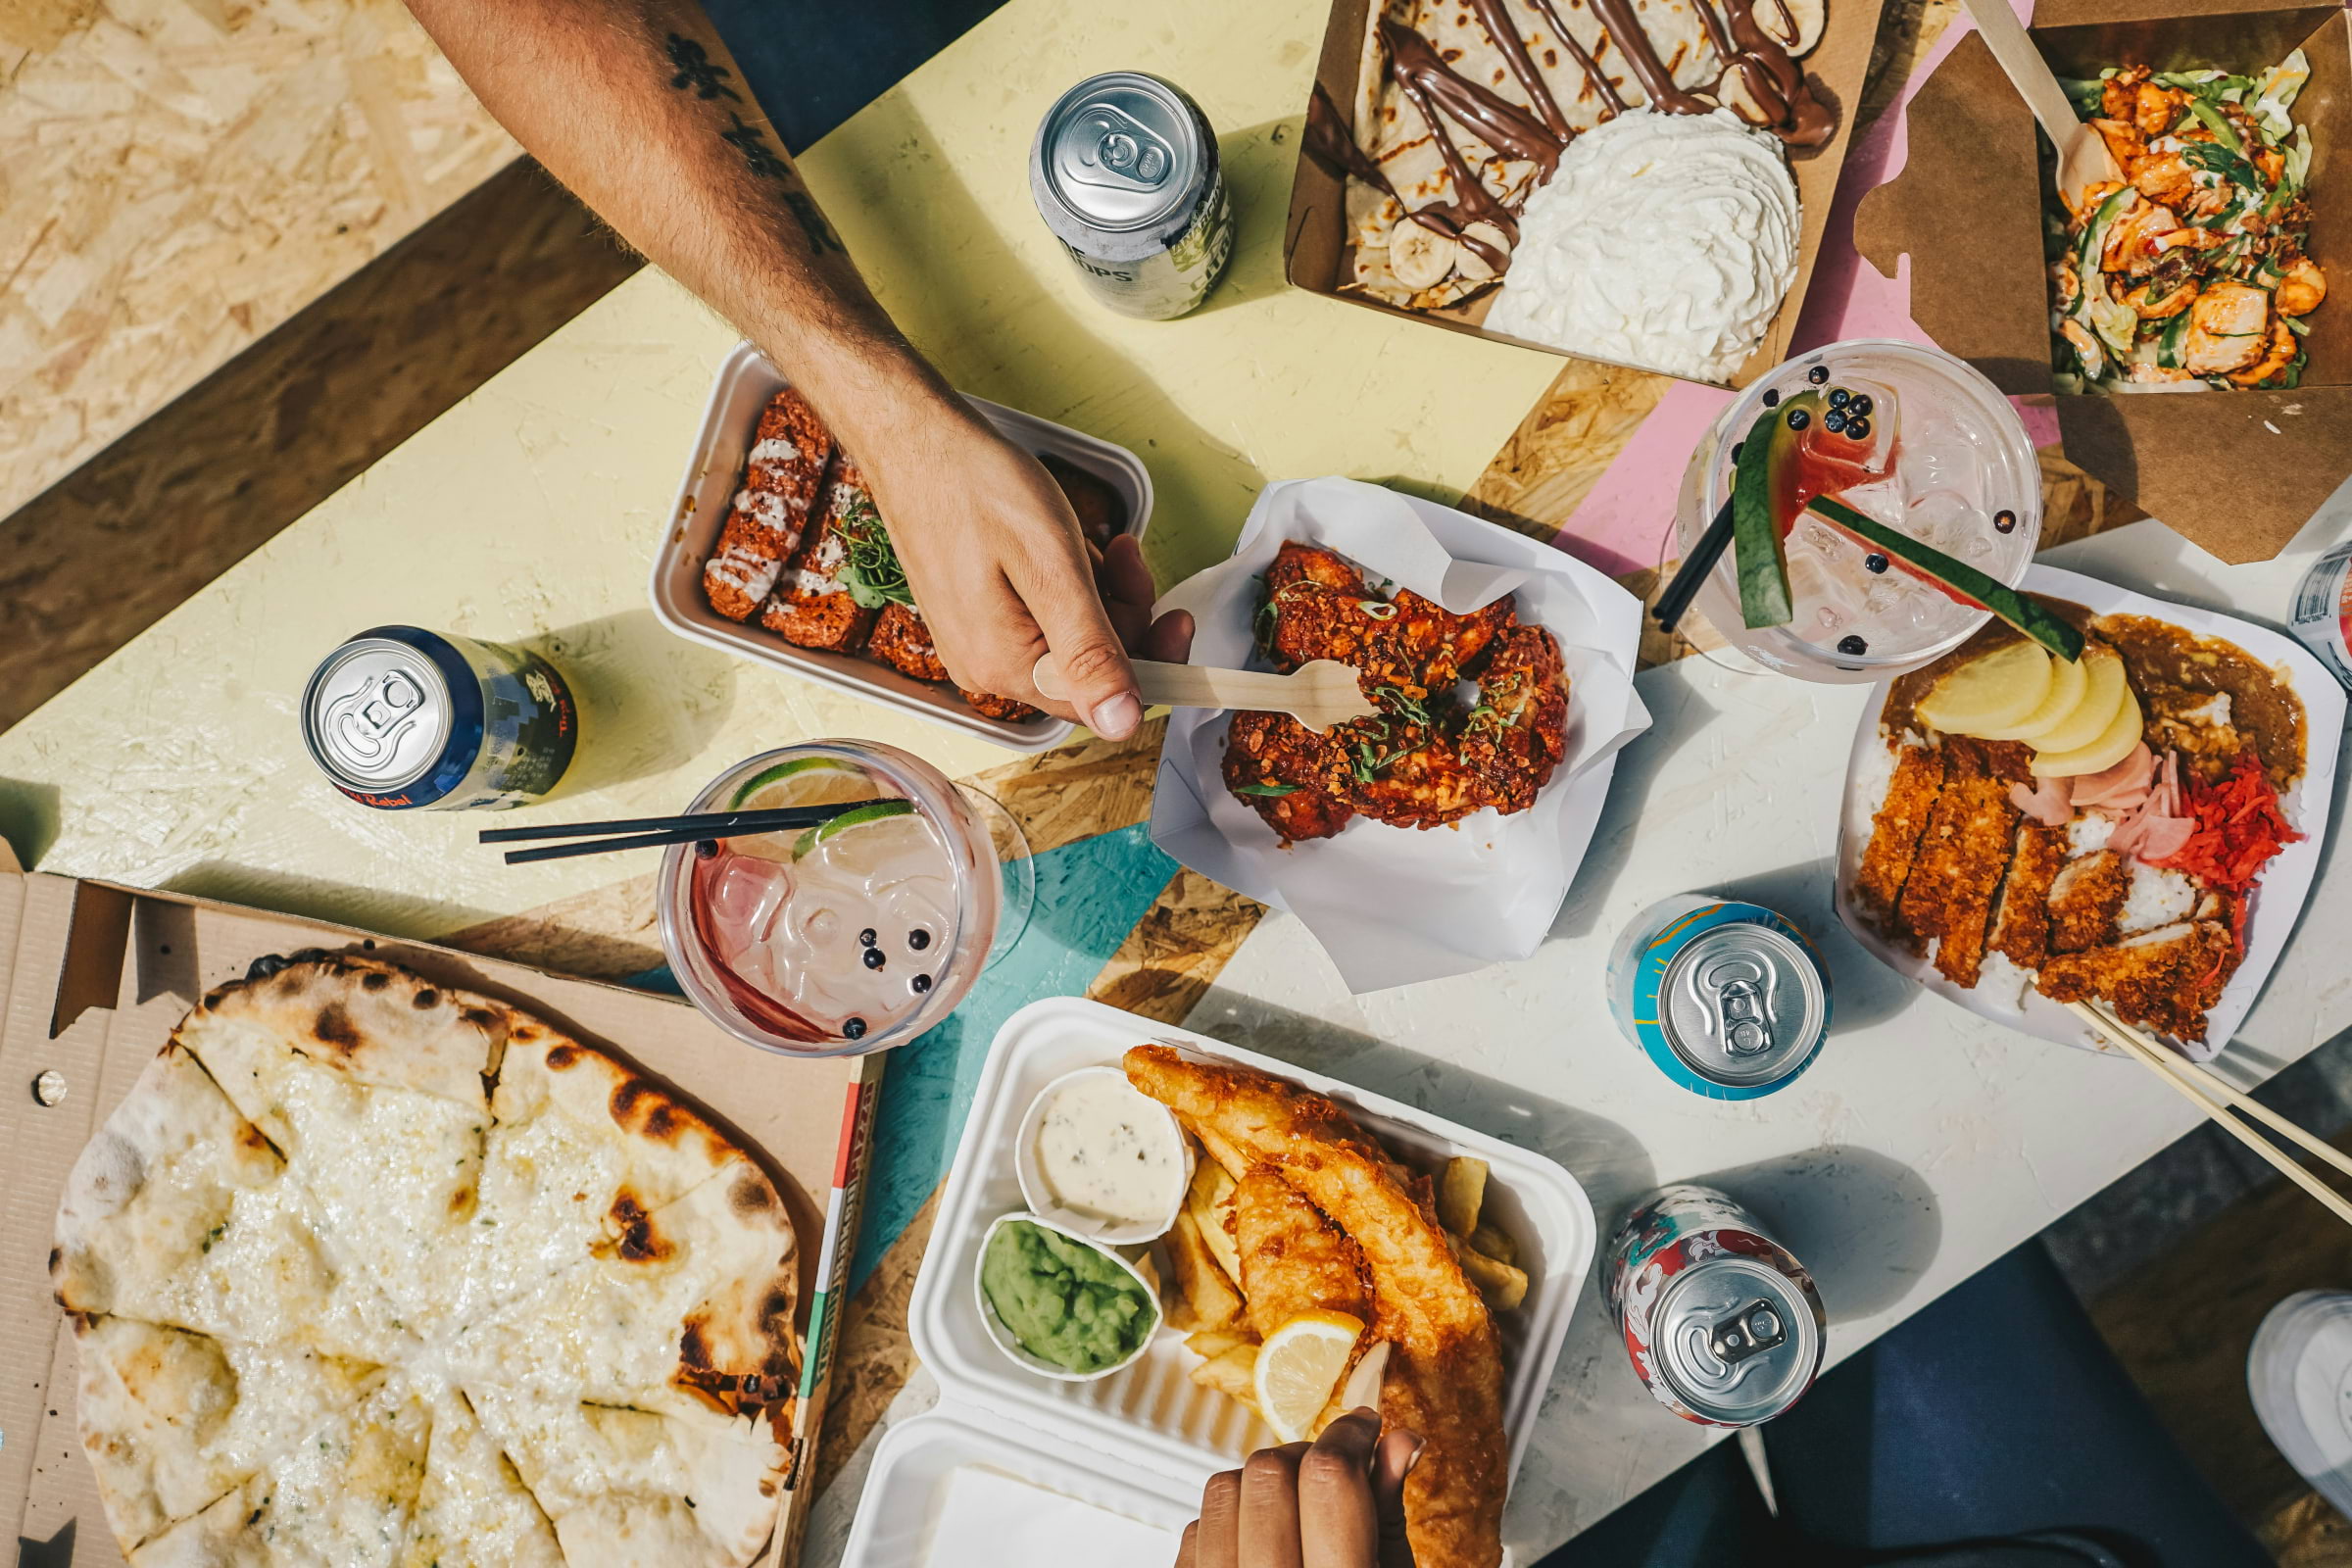 A bird's-eye view of people tucking into takeaway food on a table